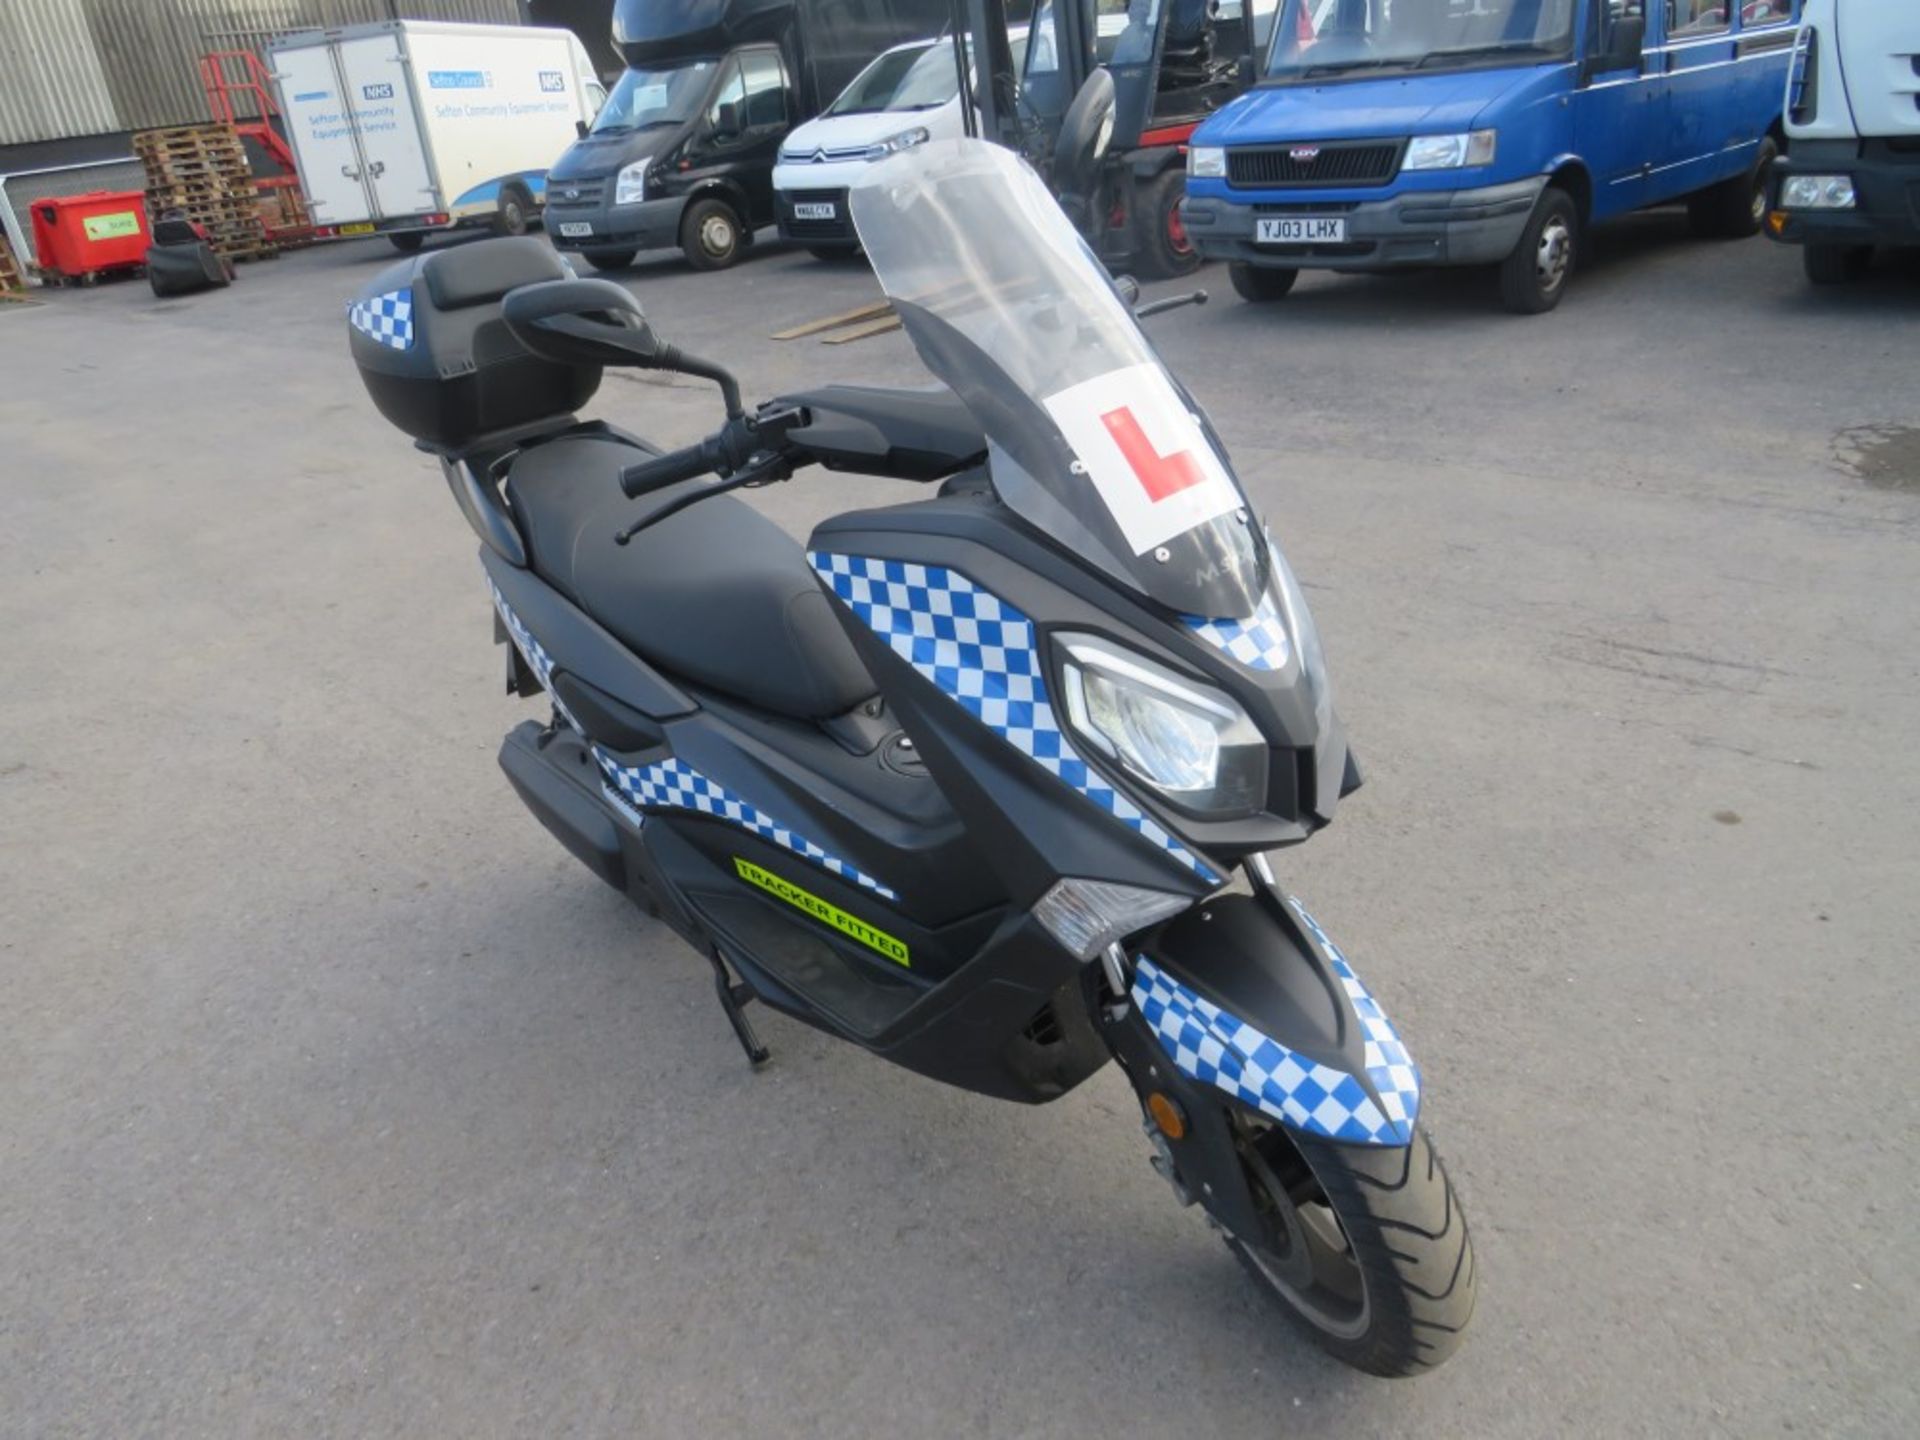 70 reg EFUN TIGER LYNX ELECTRIC SCOOTER, 1ST REG 10/20, MILEAGE NOT DISPLAYING, V5 HERE, 1 FORMER